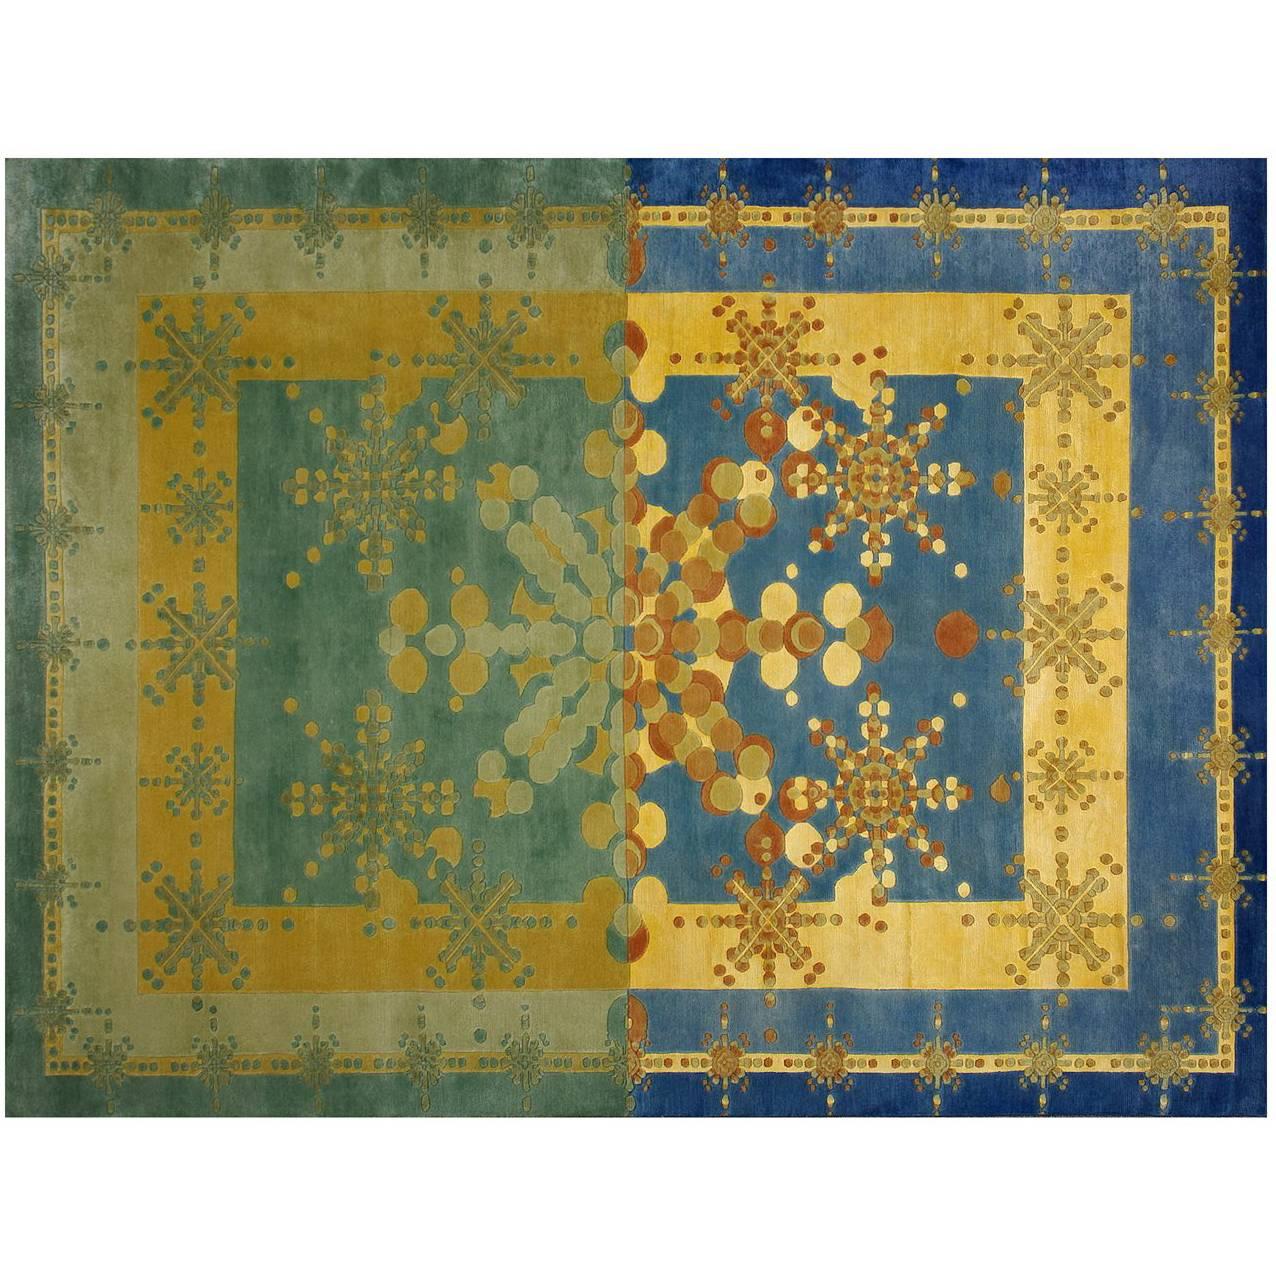 Art Rug, Tibetan Hand Knotted Technique in Wool and Silk 